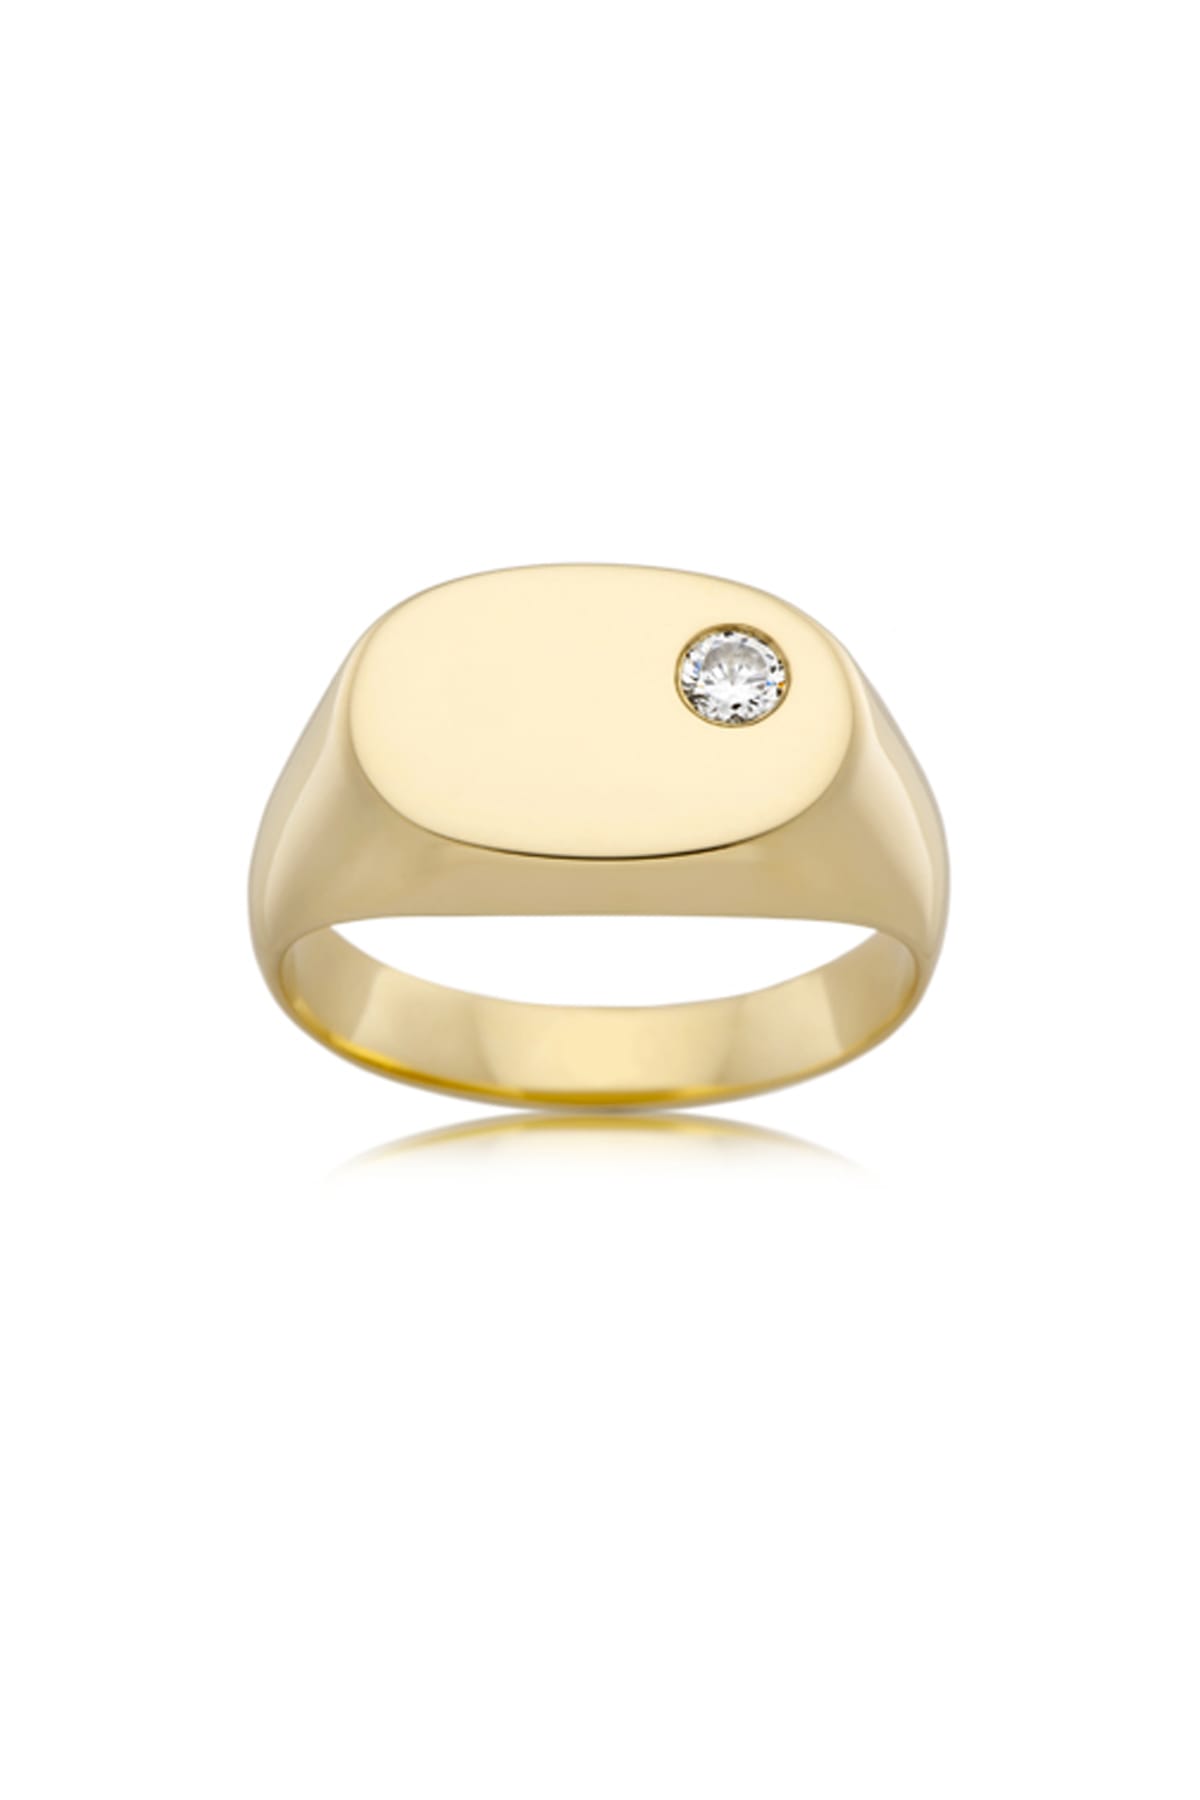 Solid Oval Diamond Set Flat Top Signet Ring available at LeGassick Diamonds and Jewellery Gold Coast, Australia.